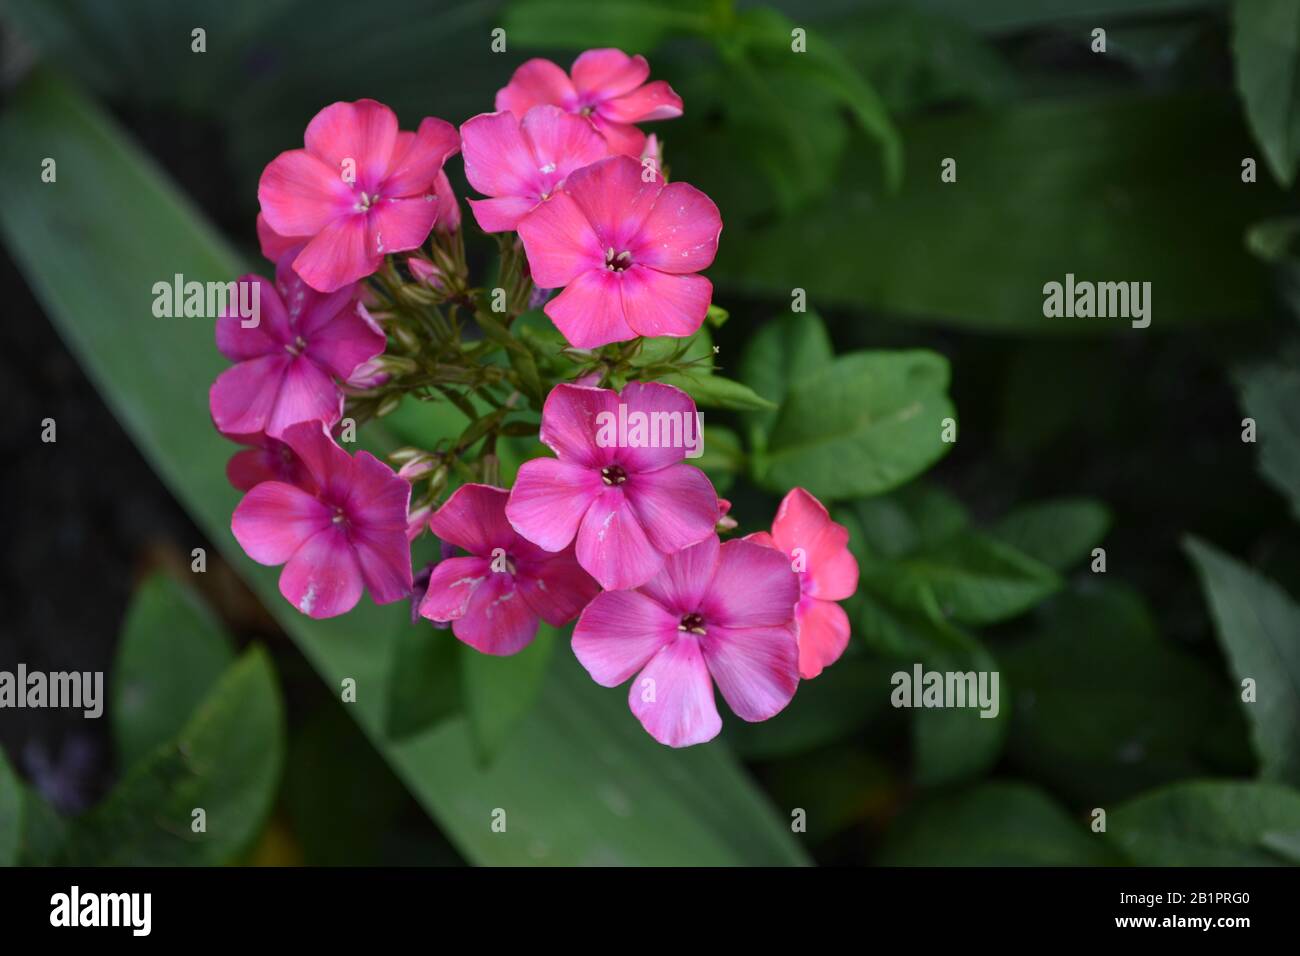 Phlox. Polemoniaceae. Growing flowers. Flowerbed. Garden. Floriculture. Pink inflorescence. Beautiful flowers. Green leaves. High bushes. Summer day. Stock Photo